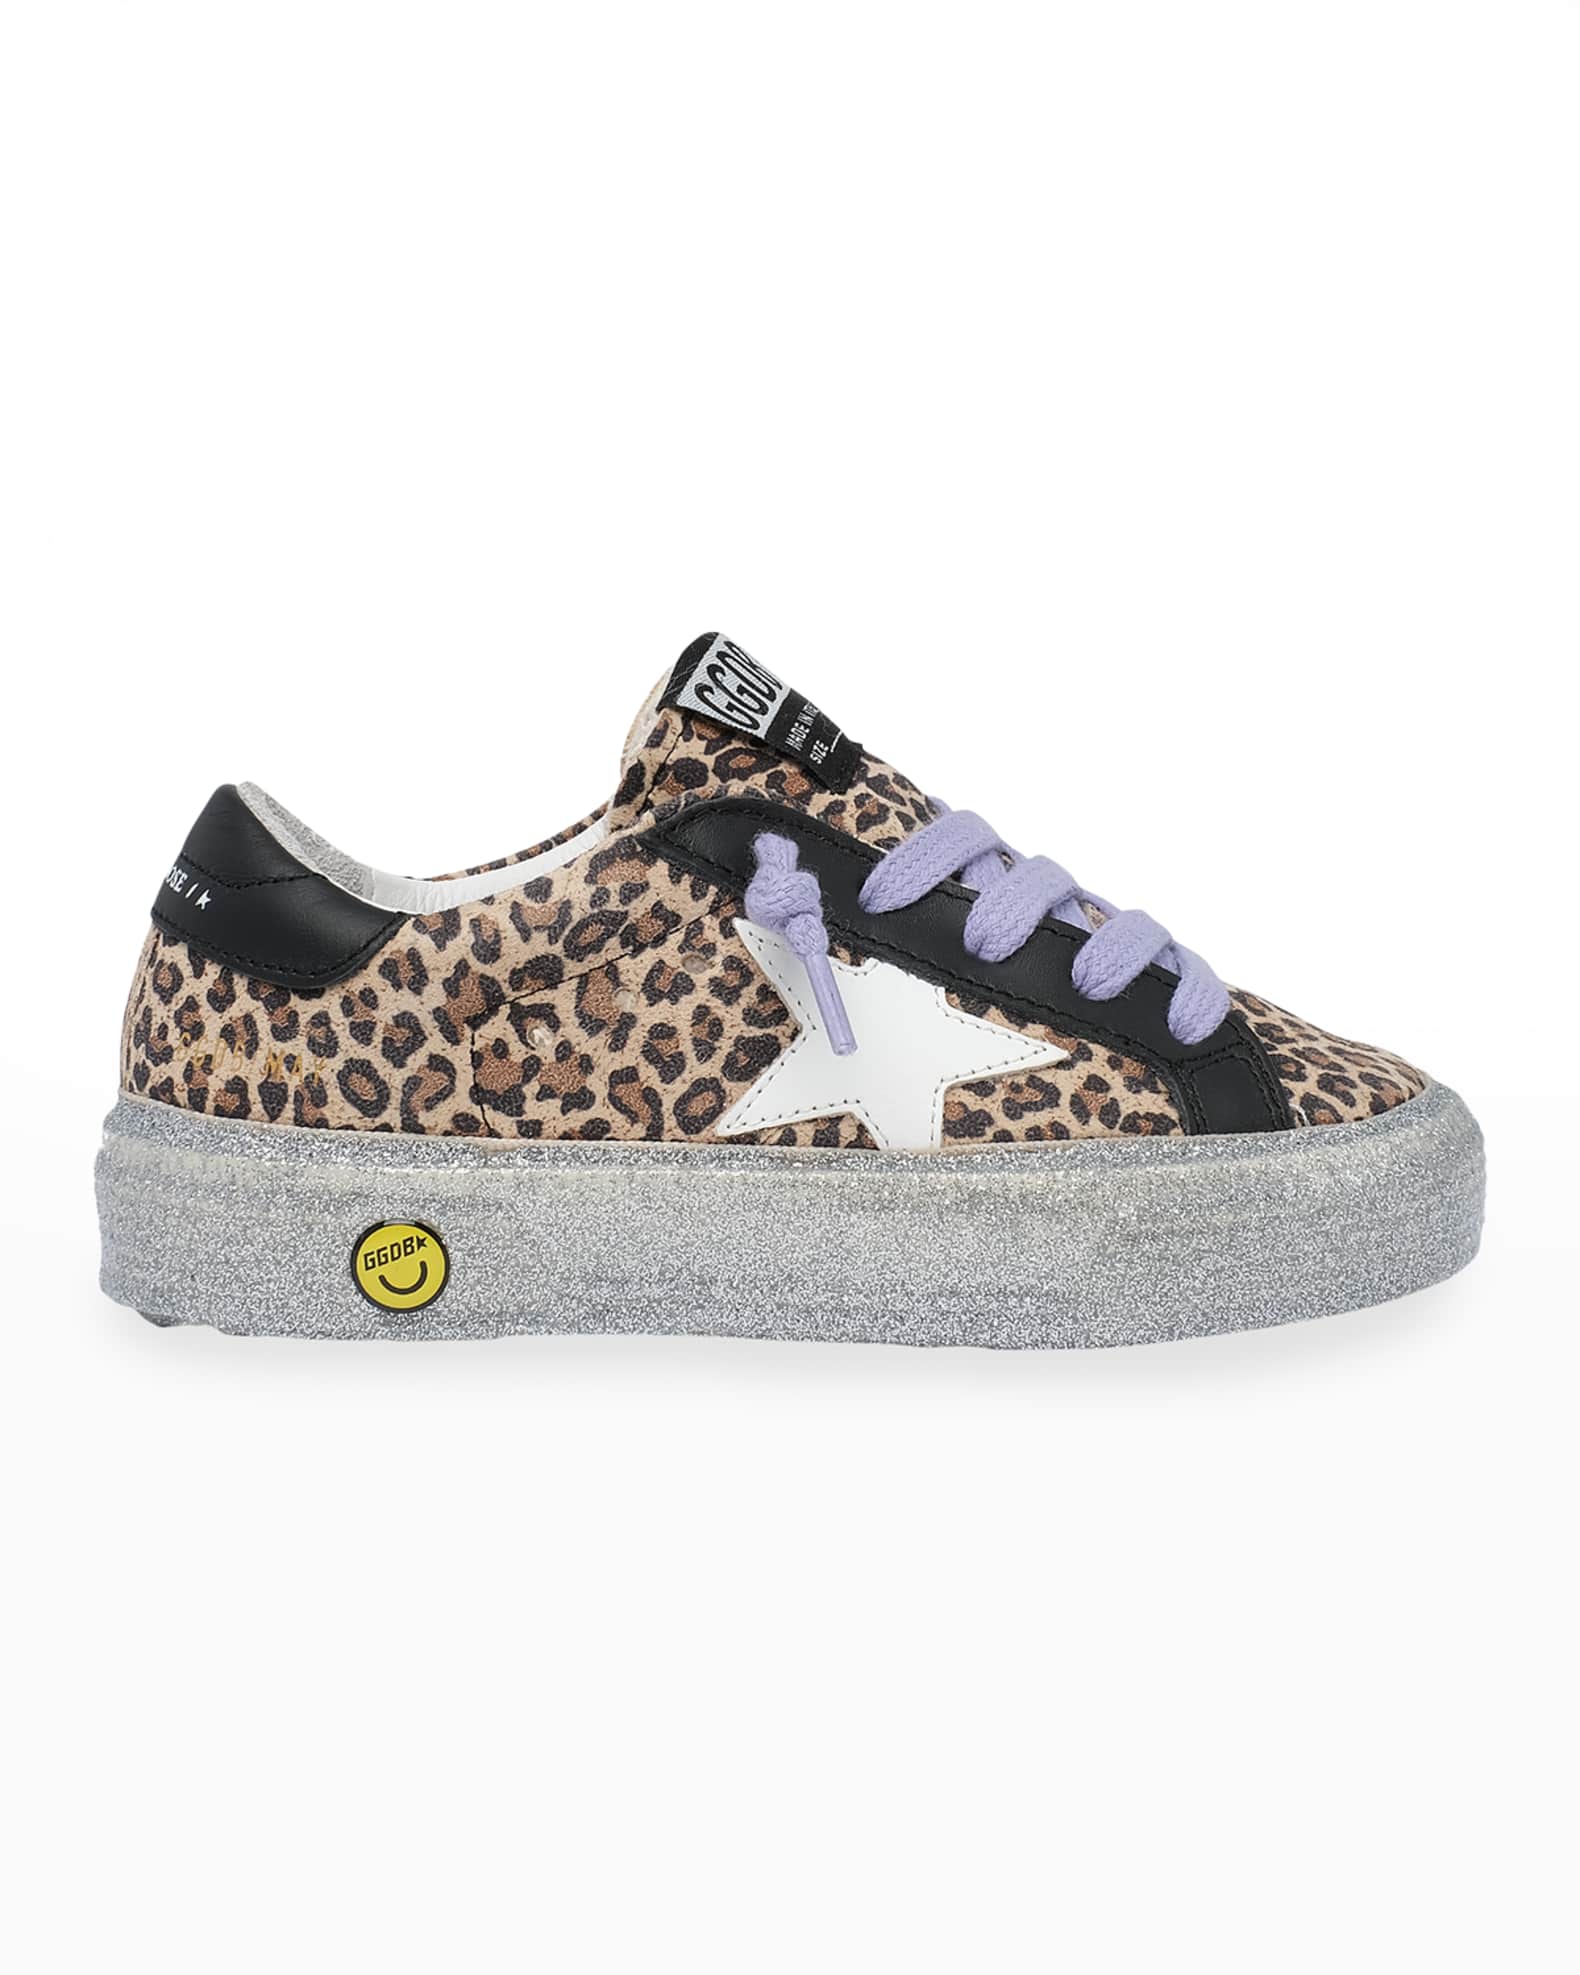 Golden Goose Girl's May Leopard-Print Glitter-Sole Sneakers, Baby